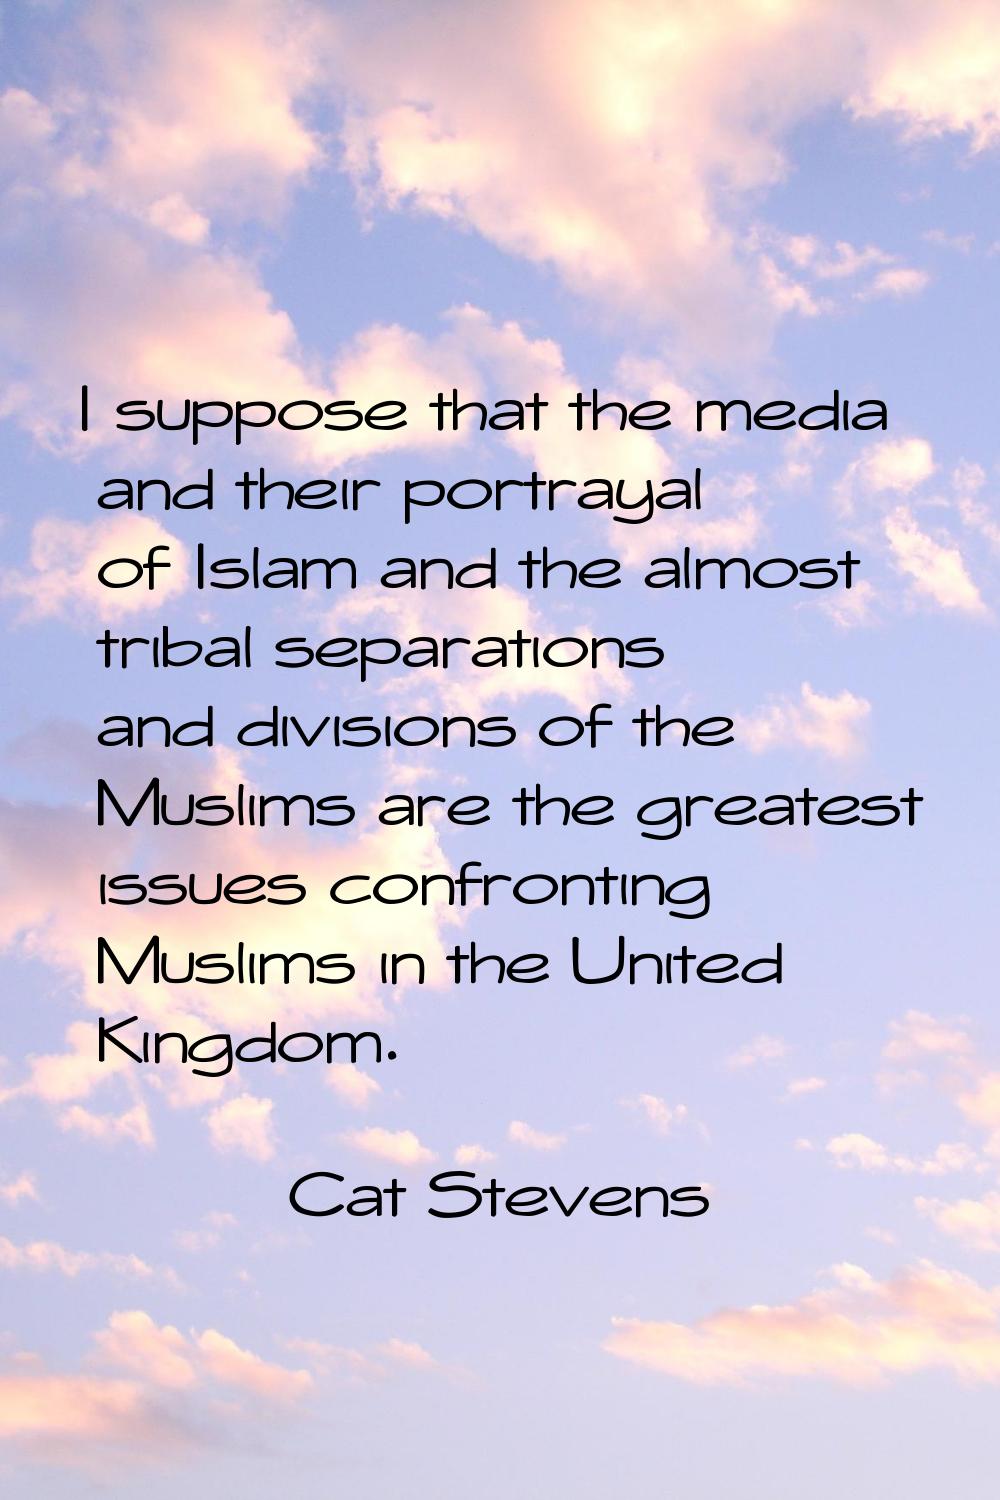 I suppose that the media and their portrayal of Islam and the almost tribal separations and divisio